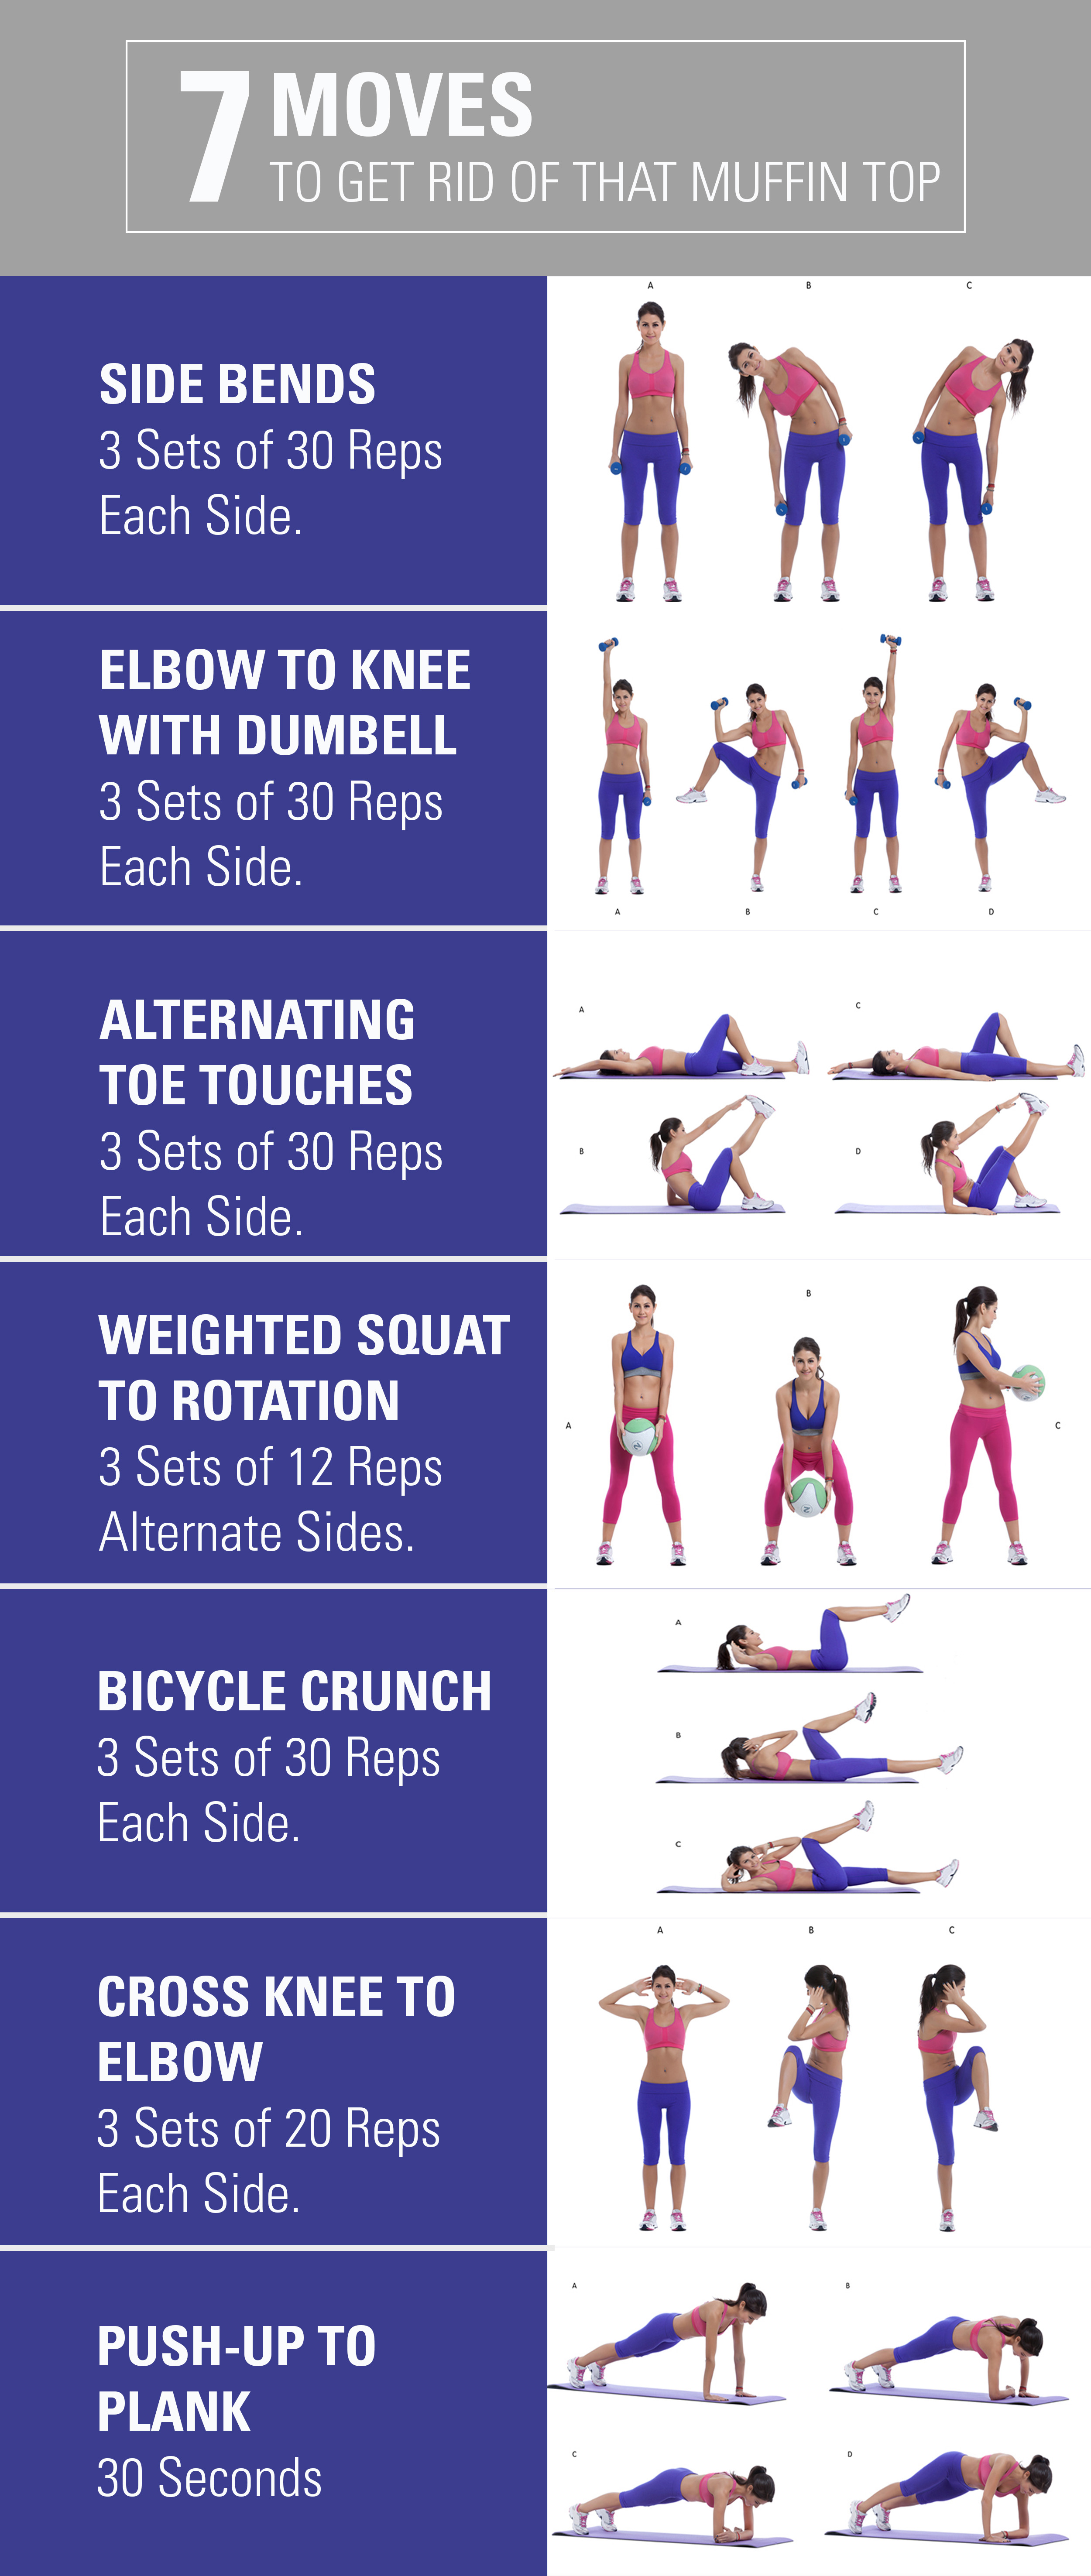 7-exercises-to-get-rid-of-muffin-top-fitness-republic